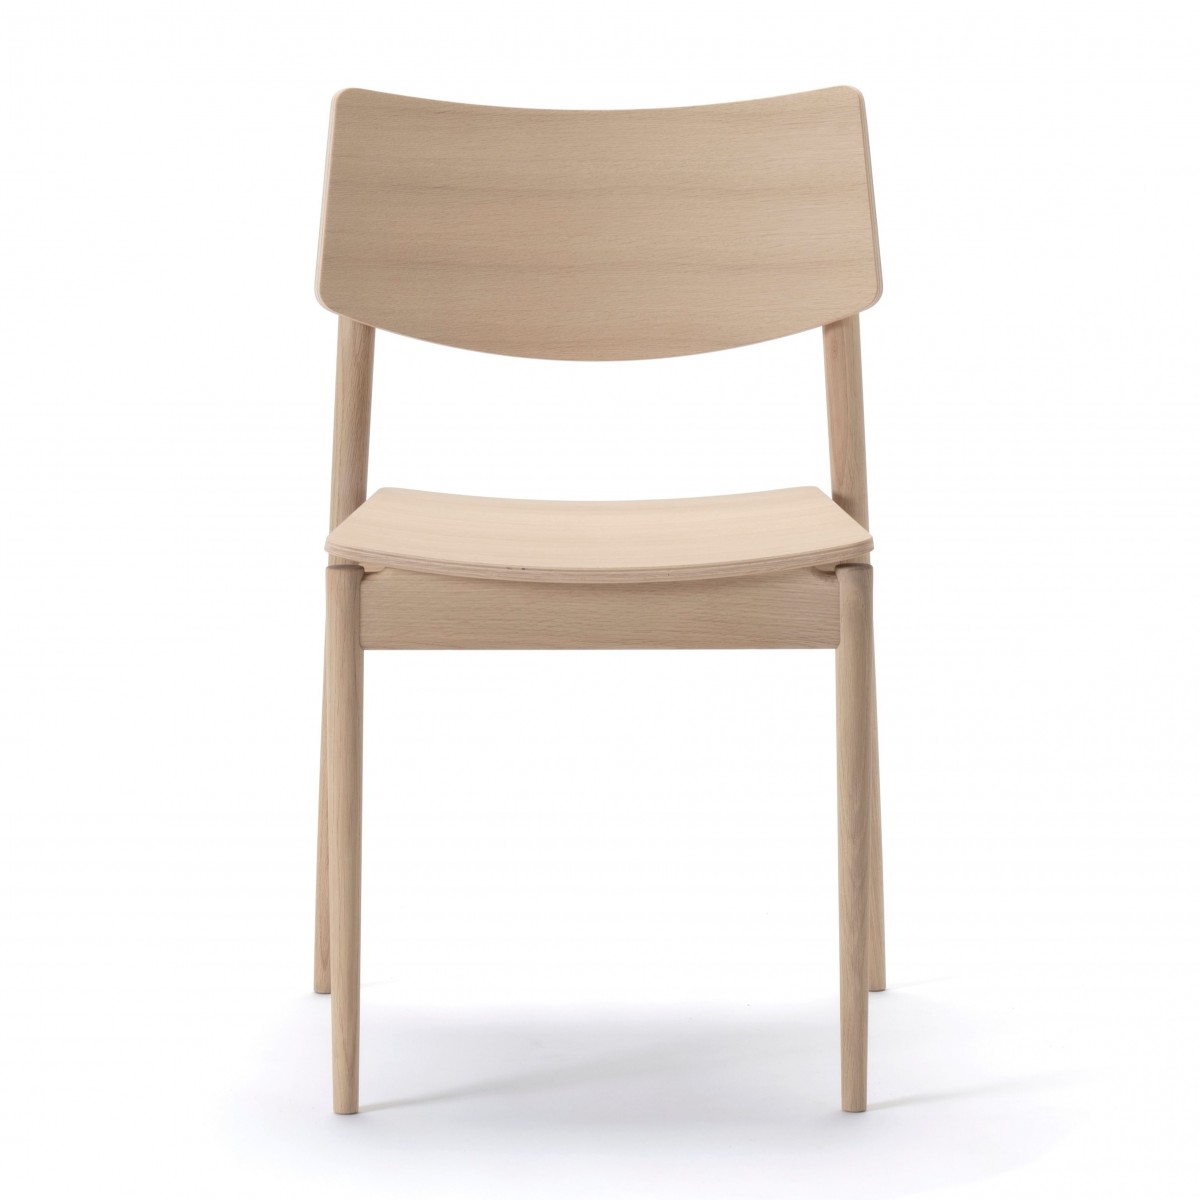 A-DC01 Cafe Chair